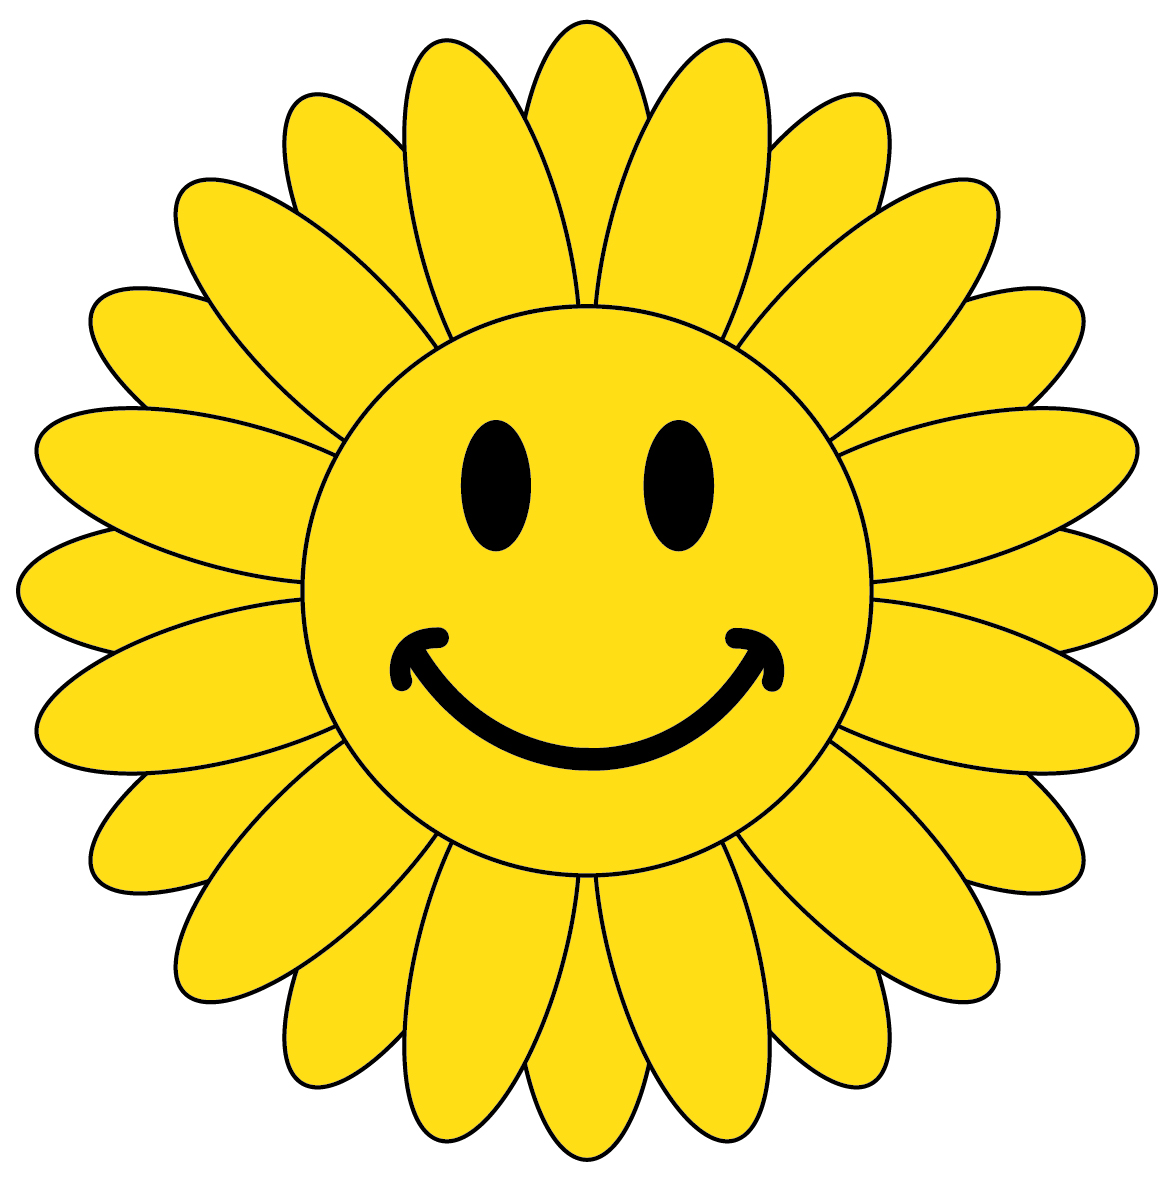 All Yellow Flower Smiley Face White Daisy Flower Smiley Face